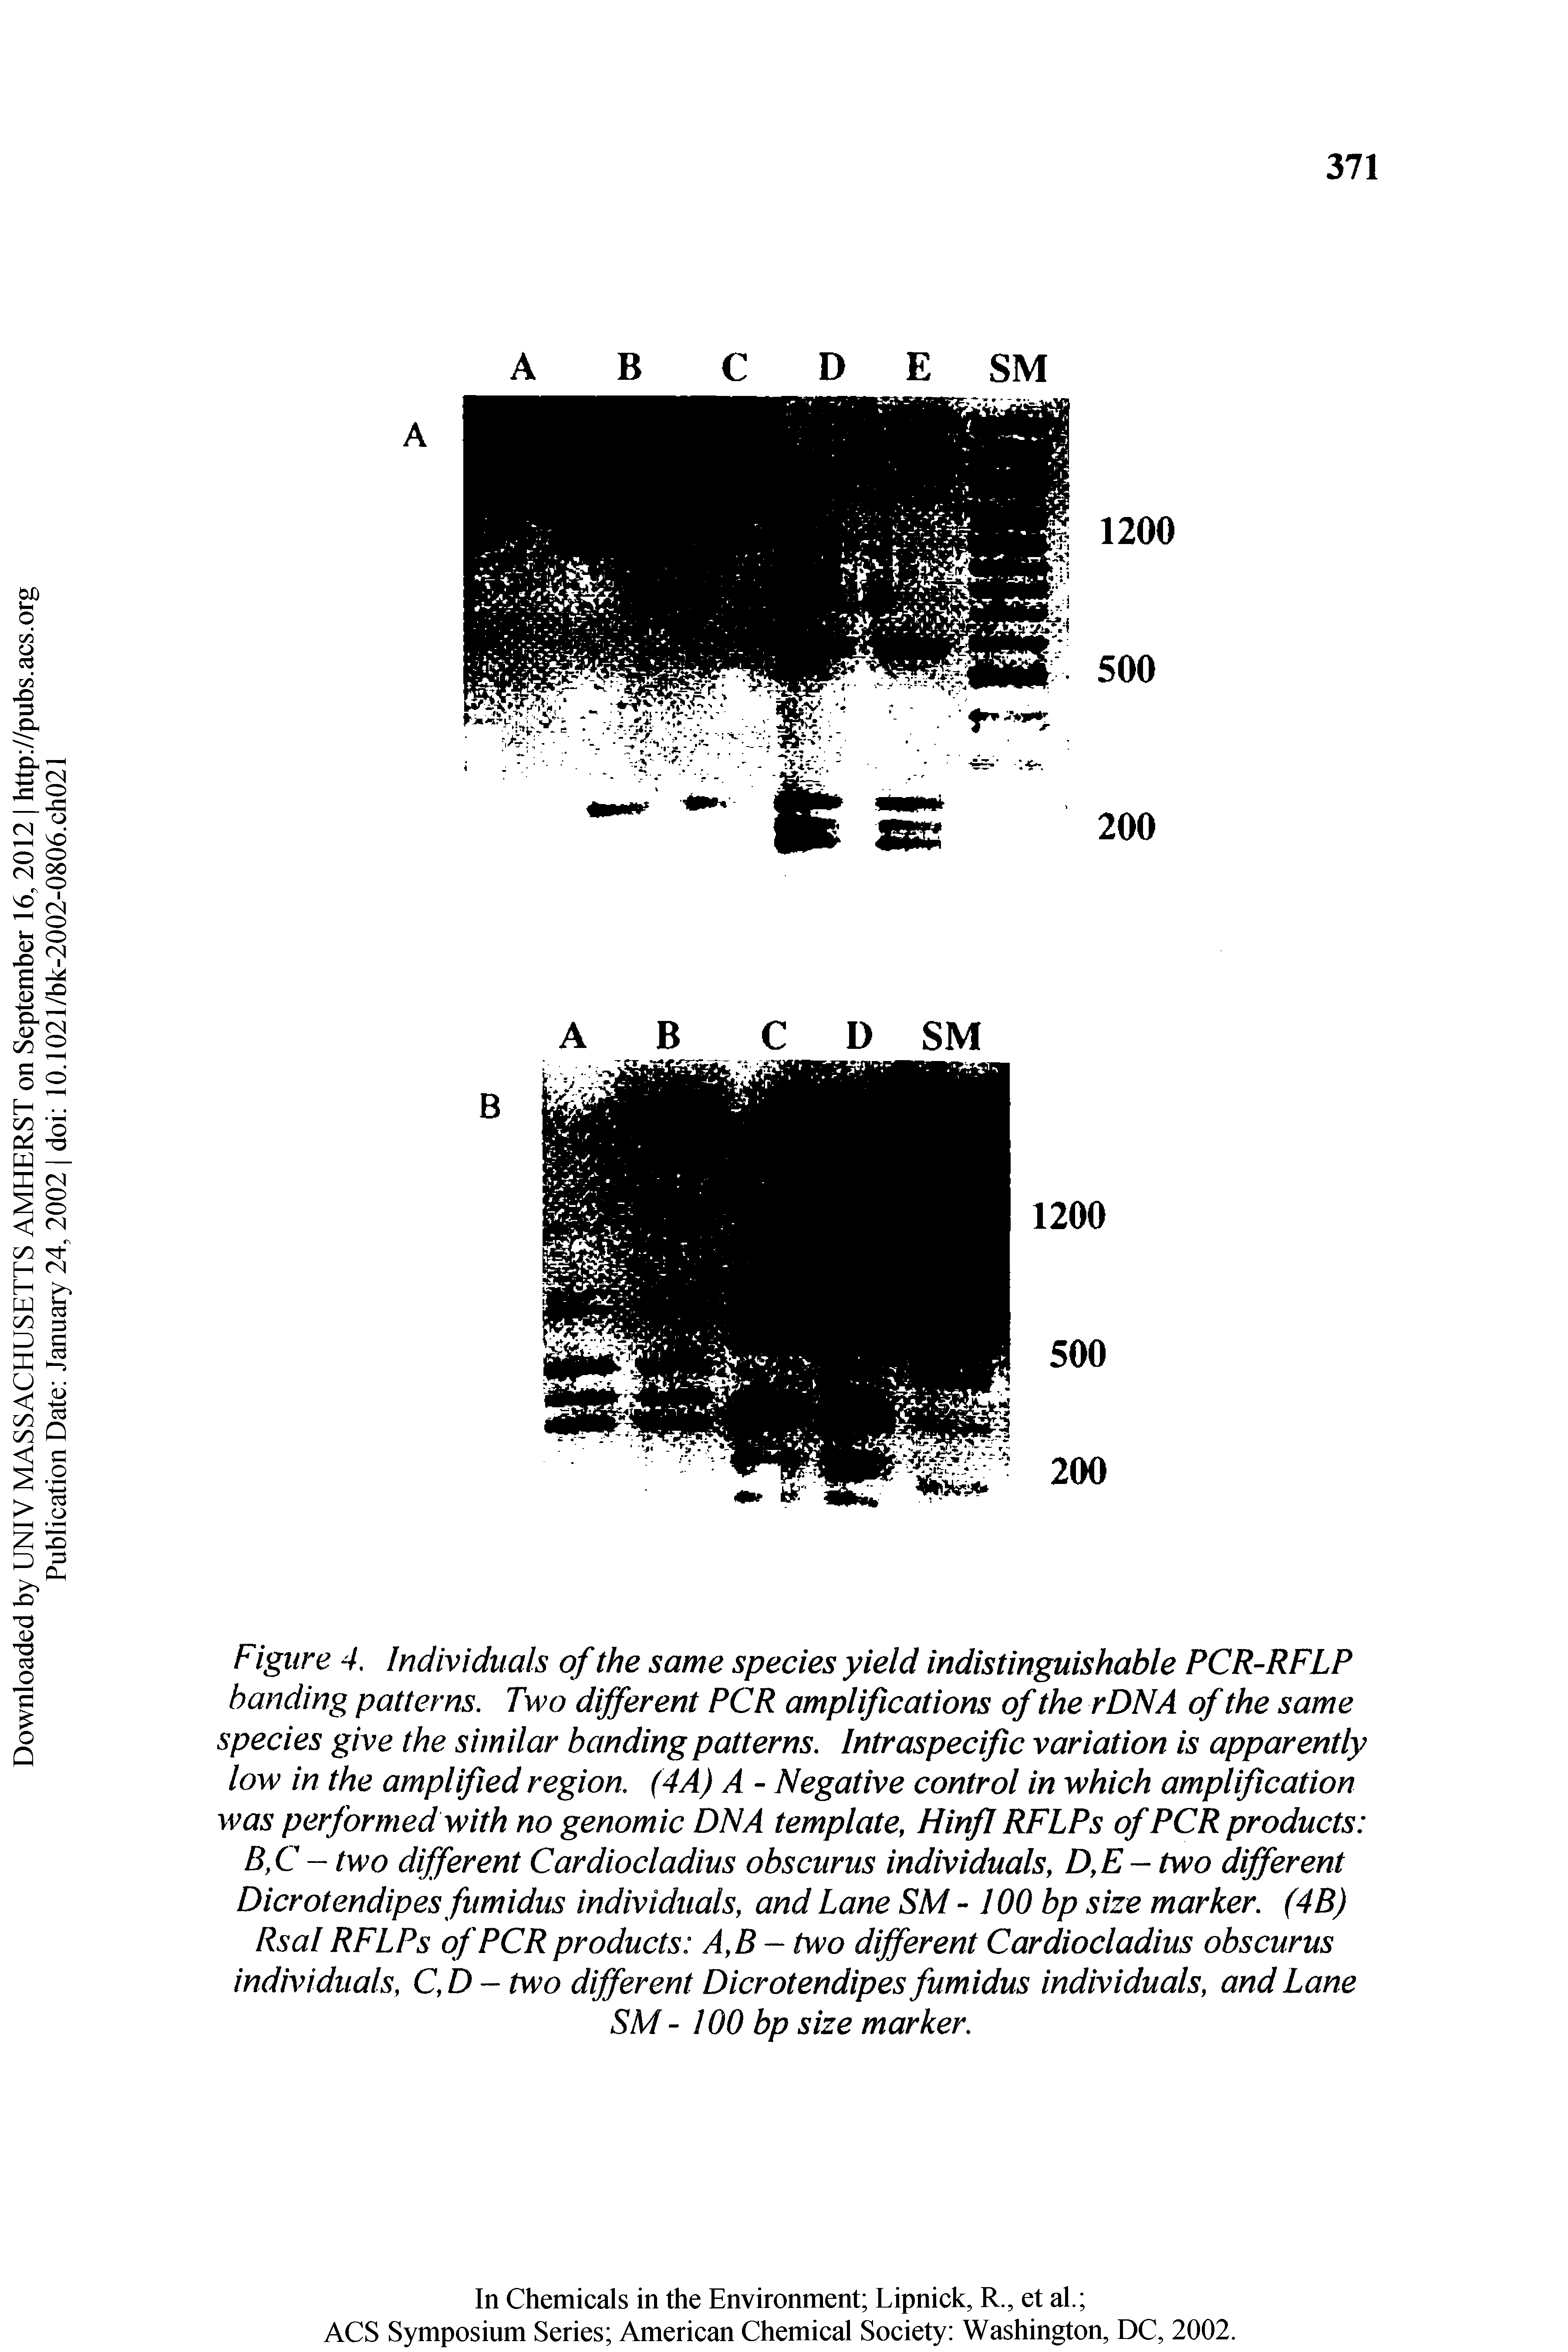 Figure 4. Individuals of the same species yield indistinguishable PCR-RFLP handing patterns. Two different PCR amplifications of the rDNA of the same species give the similar banding patterns. Intraspecific variation is apparently low in the amplified region, (4A) A - Negative control in which amplification was performed with no genomic DNA template, Hinfl RFLPs of PCR products B,C - two different Cardiocladius obscurus individuals, D,E- two different Dicrotendipes fumidus individuals, and Lane SM -100 bp size marker. (4B) Rsal RFLPs of PCR products A,B- two different Cardiocladius obscurus individuals, C,D- two different Dicrotendipes fumidus individuals, and Lane SM - 100 bp size marker.